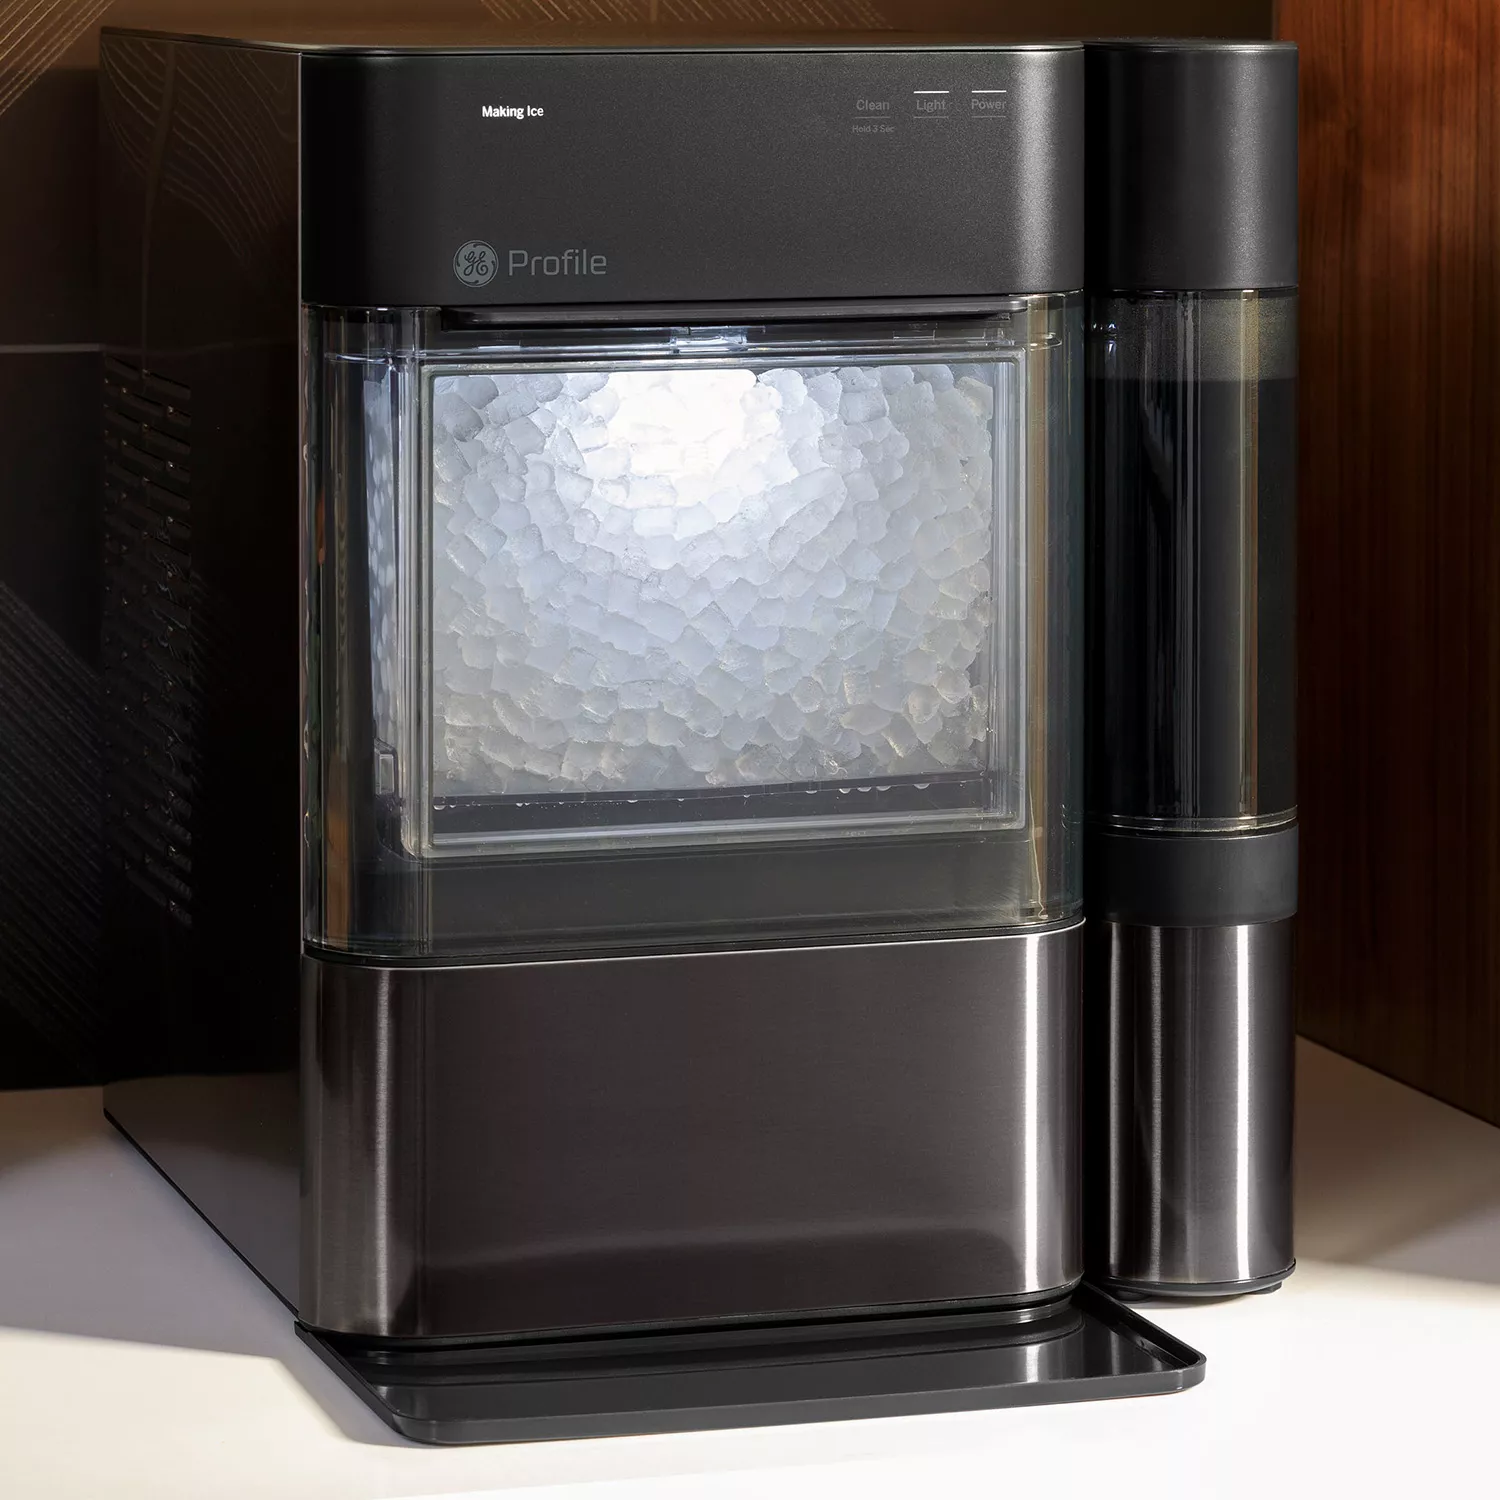 The GE Profile Opal Countertop Nugget Ice Maker Is on Sale